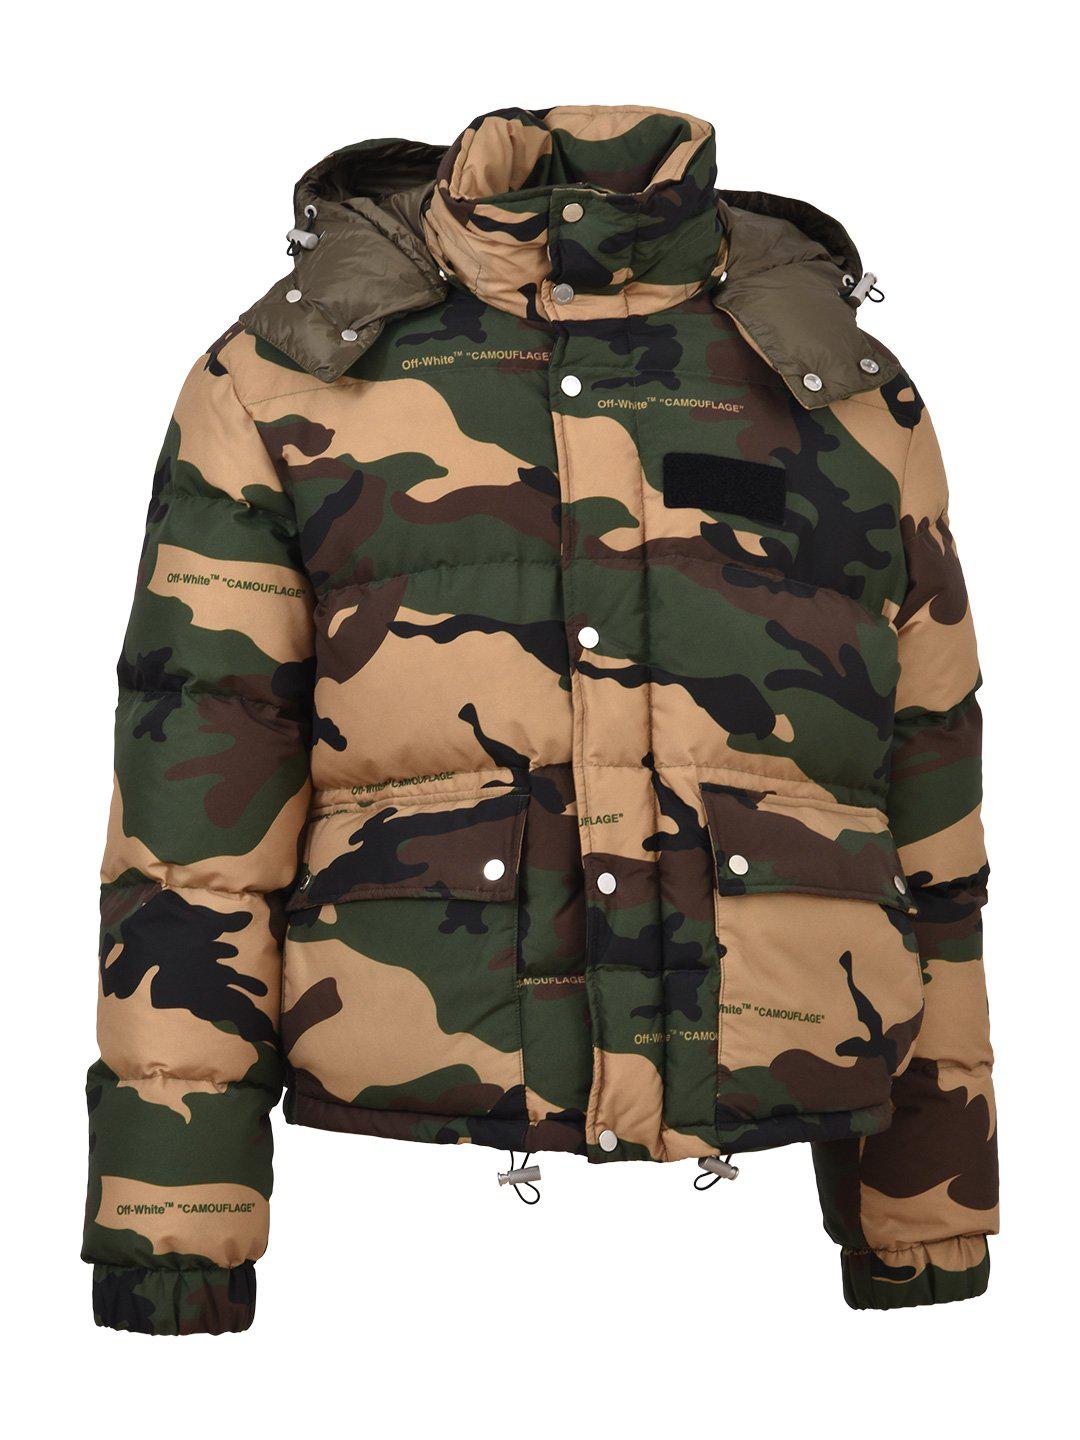 Off-White c/o Virgil Abloh Synthetic Camouflage Puffer Jacket for Men | Lyst